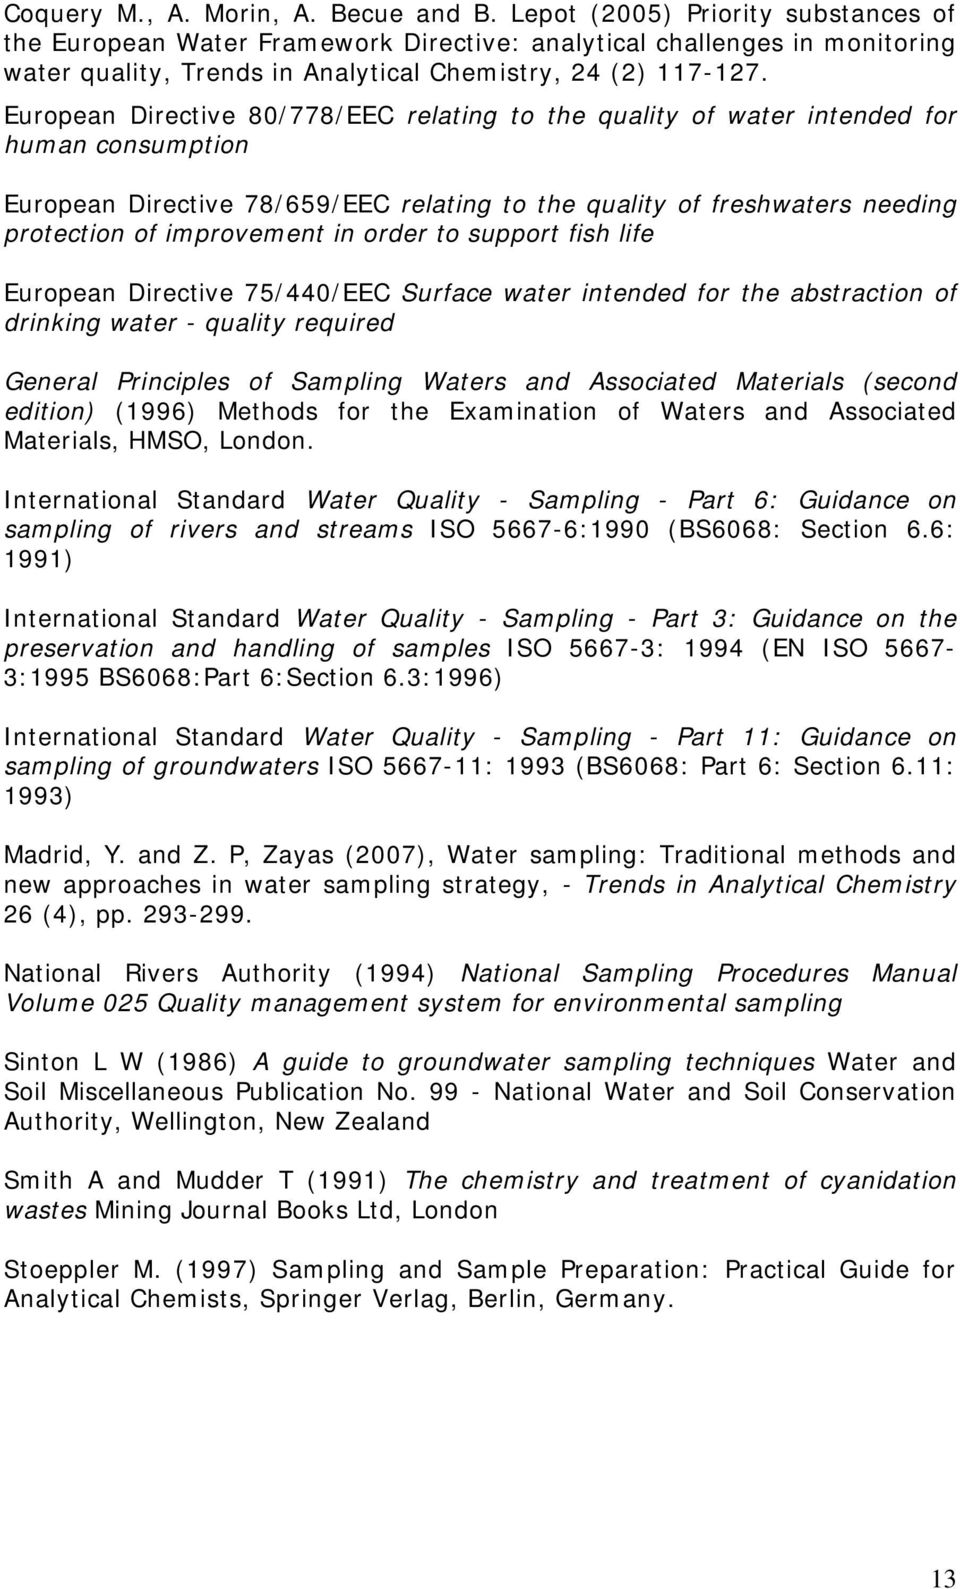 European Directive 80/778/EEC relating to the quality of water intended for human consumption European Directive 78/659/EEC relating to the quality of freshwaters needing protection of improvement in